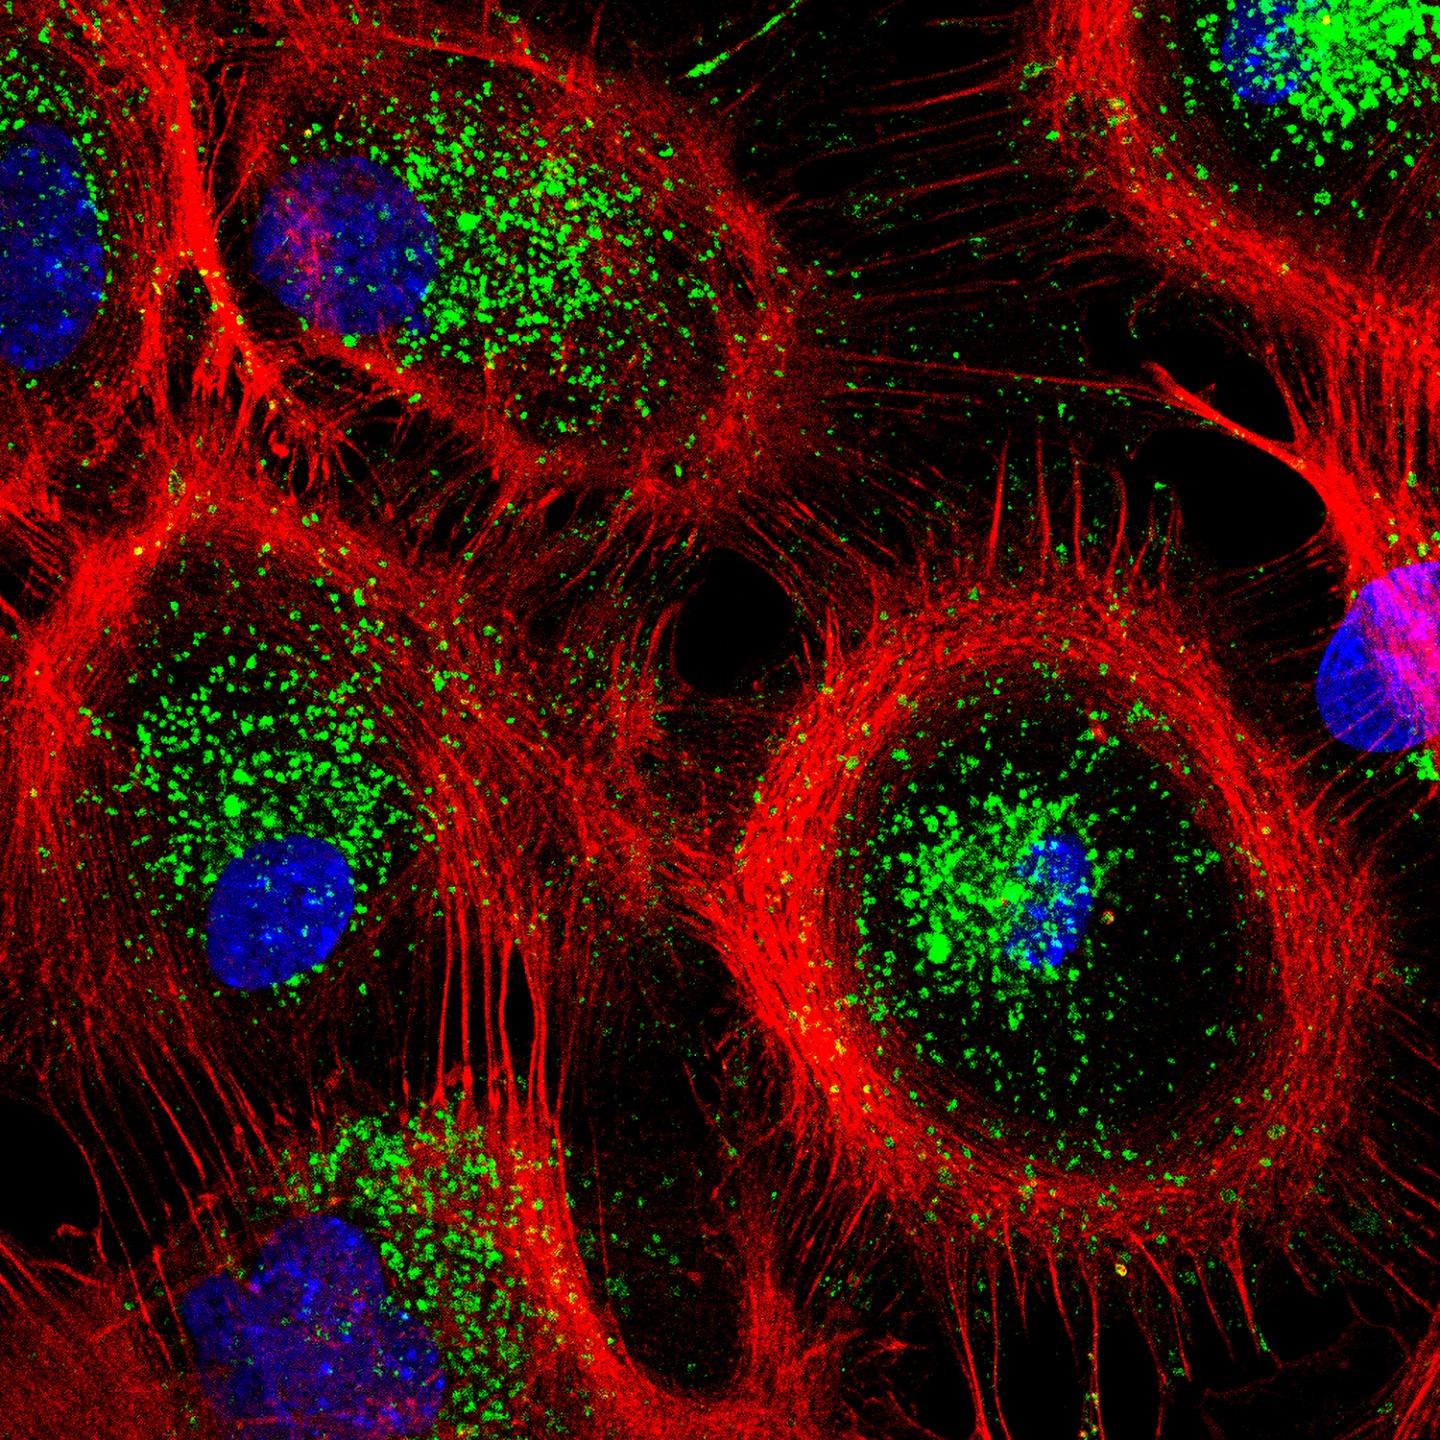 Image of mouse astrocytes showing the actin cytoskeleton (red) and lysosomes (green)